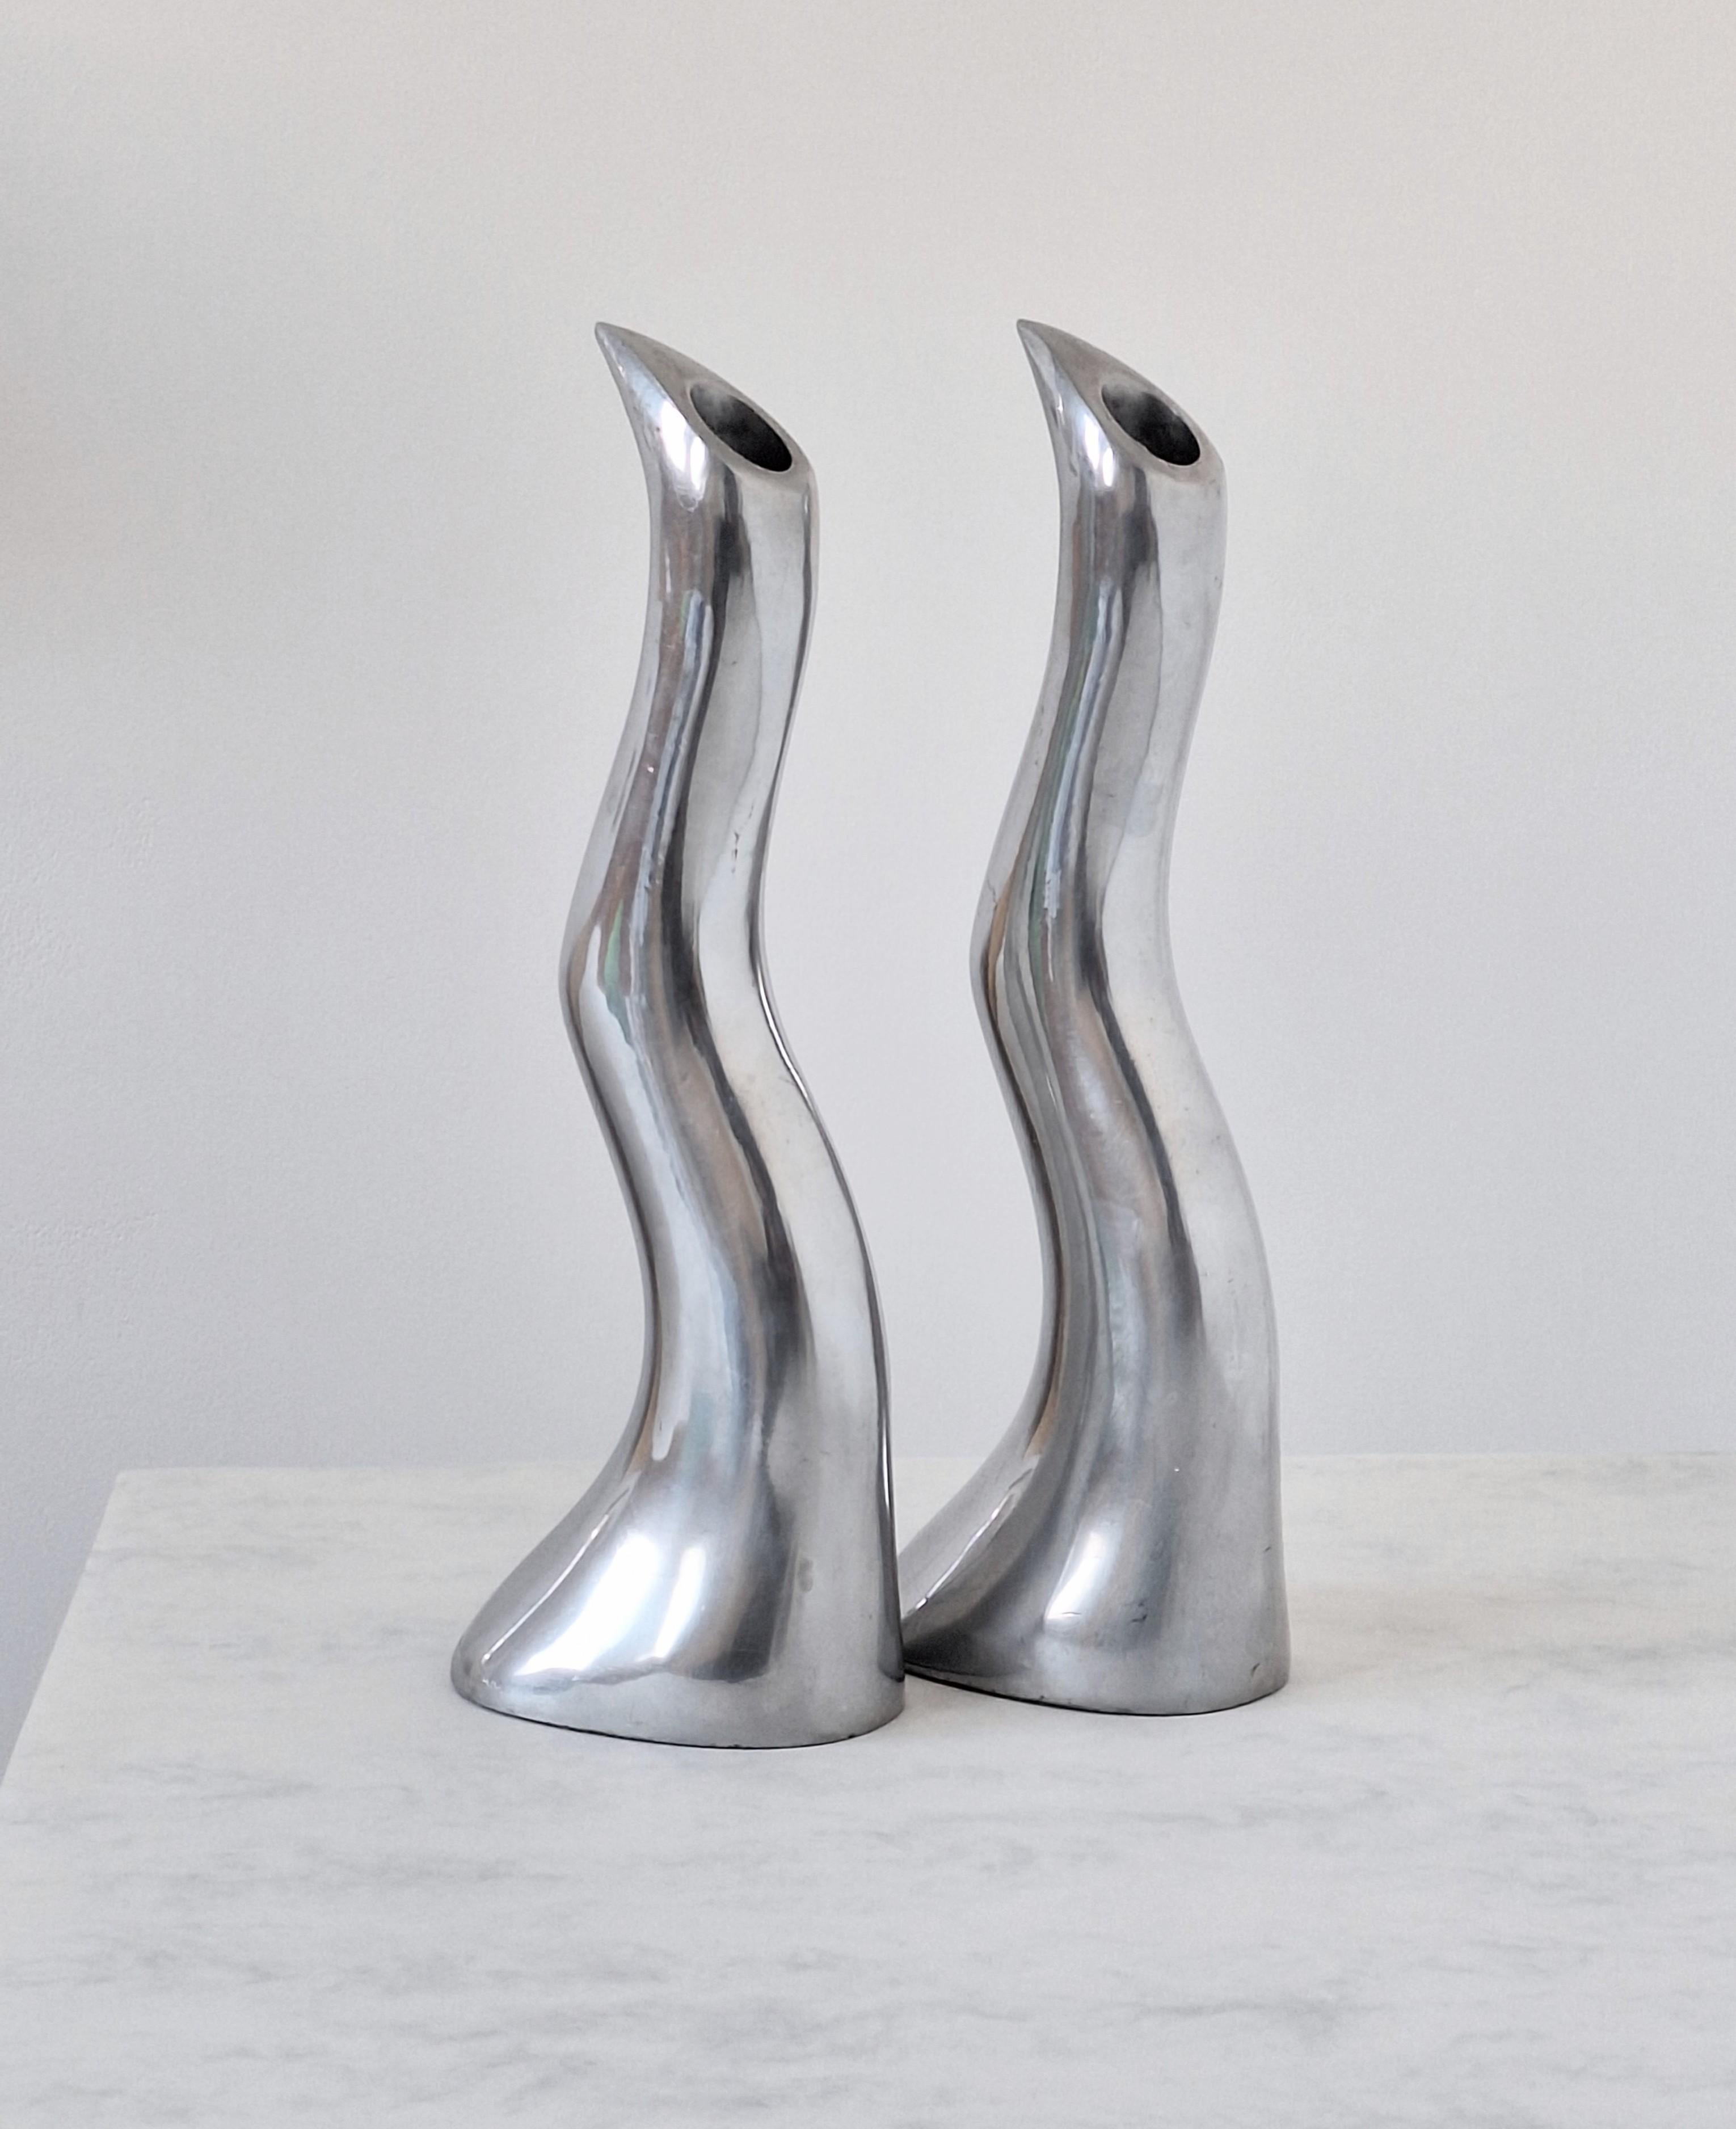 Set of 2 beautiful Modernist wavy candlesticks made of solid aluminium. 

These great statement modernist aluminium candlesticks were designed by Danish designer Anna Everlund in the eighties and have a graceful wavy zigzag shape that tapers to a